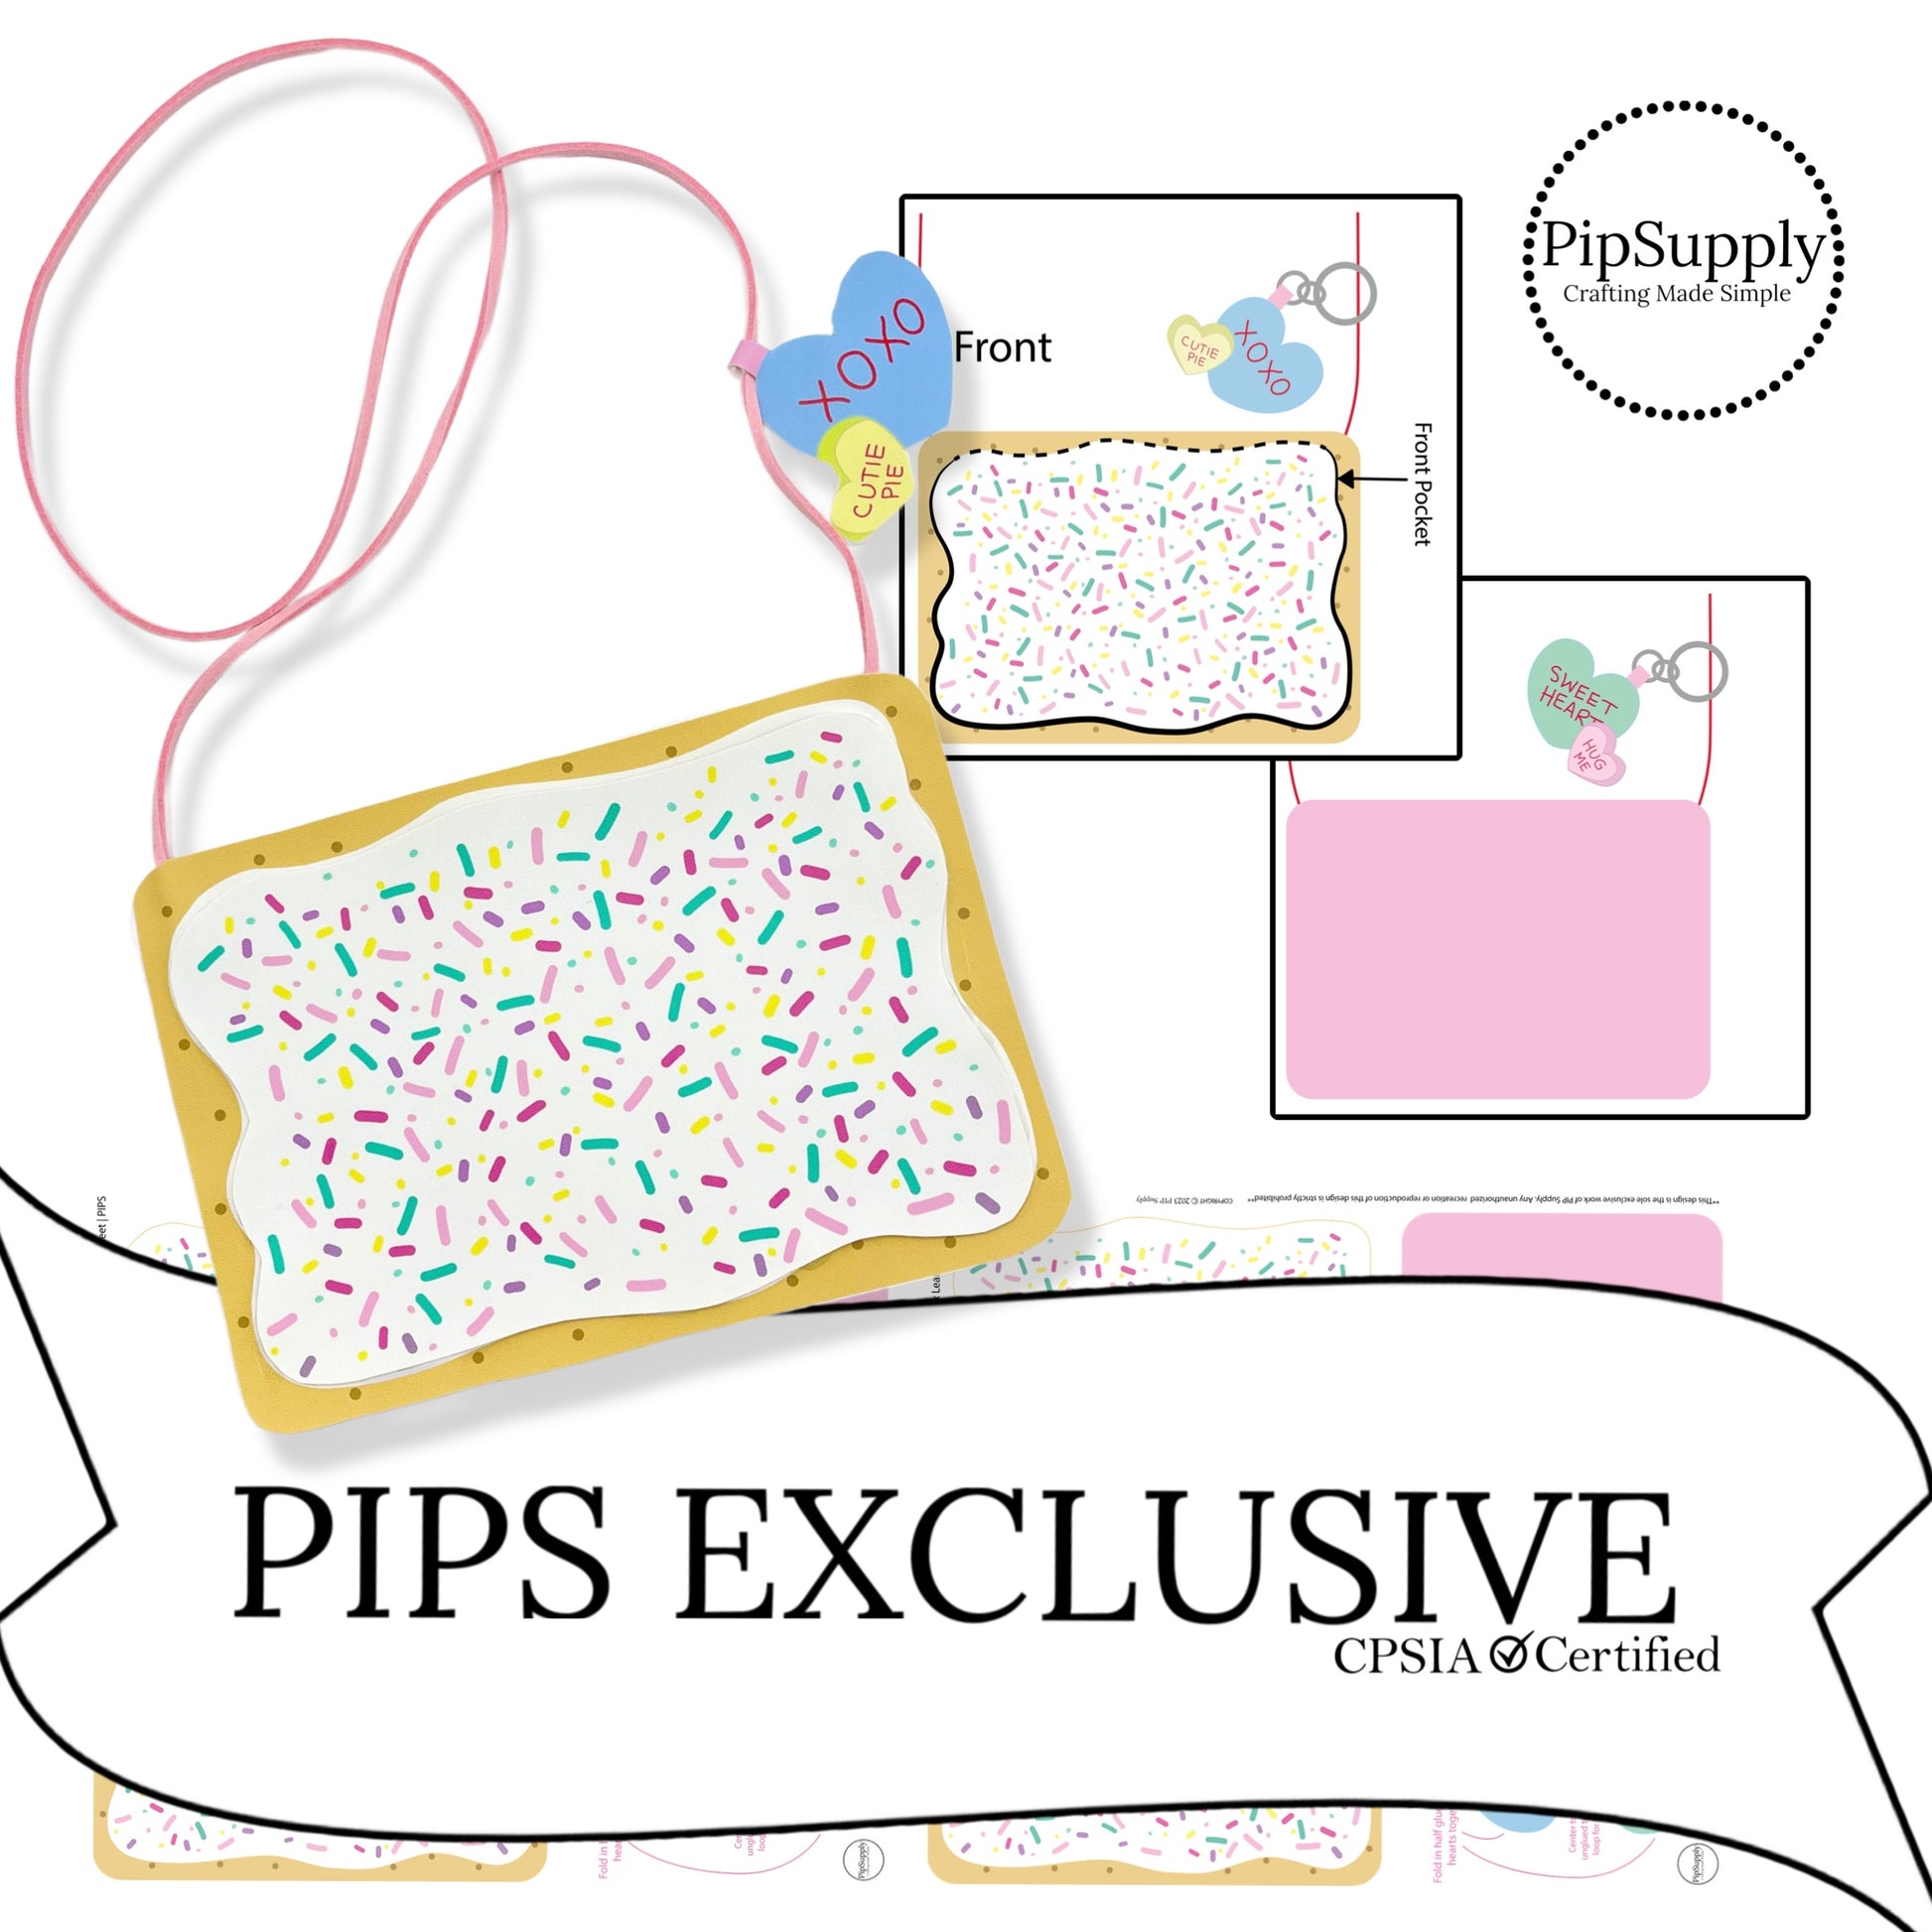 sprinkles on a baked treat printed on a faux leather sheet for a hand cut diy purse